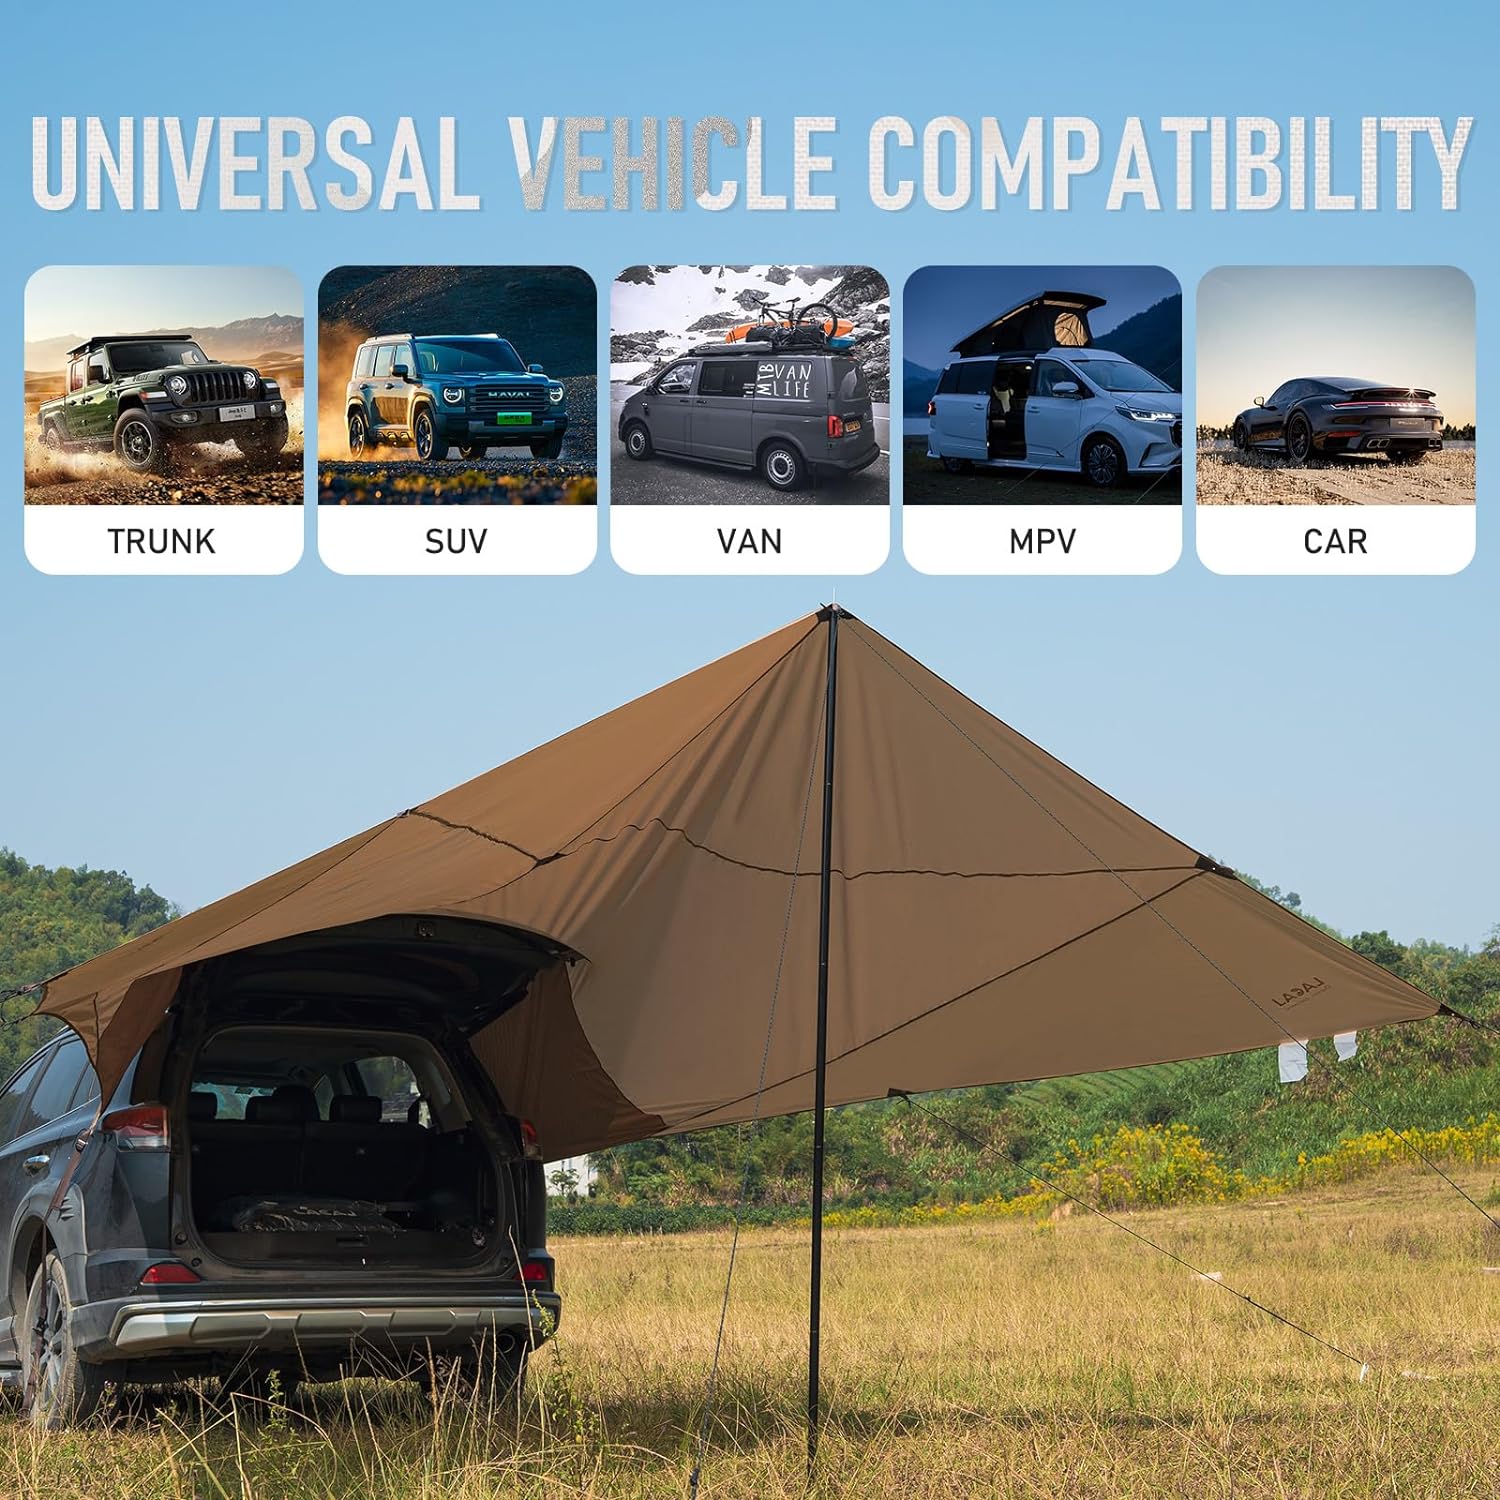 Tailgate Tent,Tailgate Awning, Car Awning Sun Shelter Waterproof 3000MM UPF 50+, for Outdoor Camping, SUV, Truck Van Camper Trailer